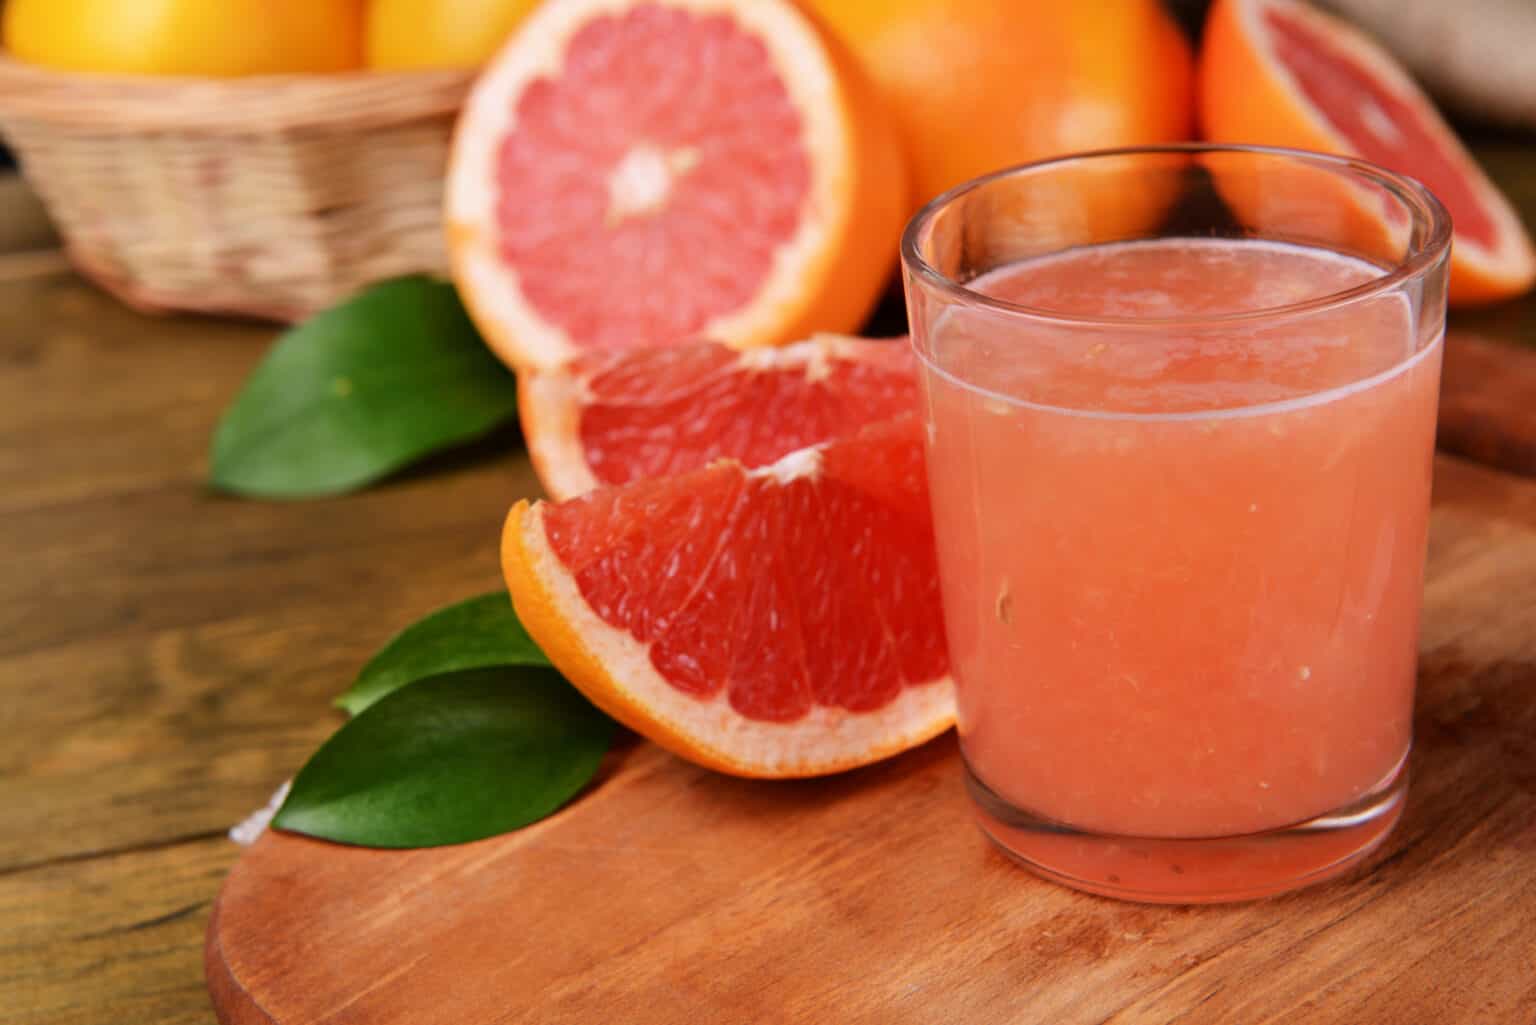 are grapefruit carbs